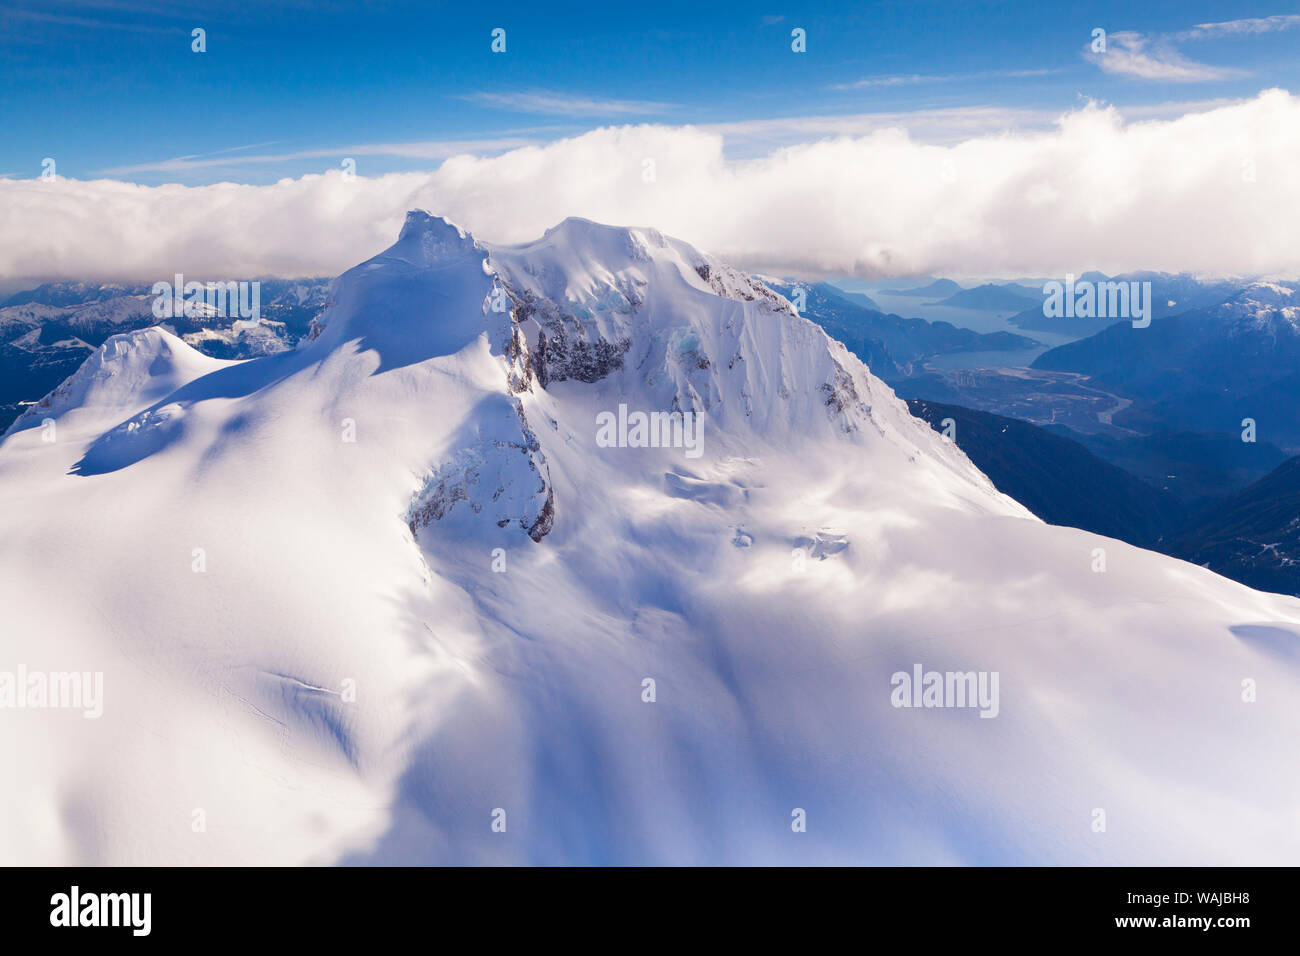 Aerial view with Mount Garibaldi in the foreground, with Howe Sound and Squamish in the background. British Columbia, Coast Mountains, Canada Stock Photo